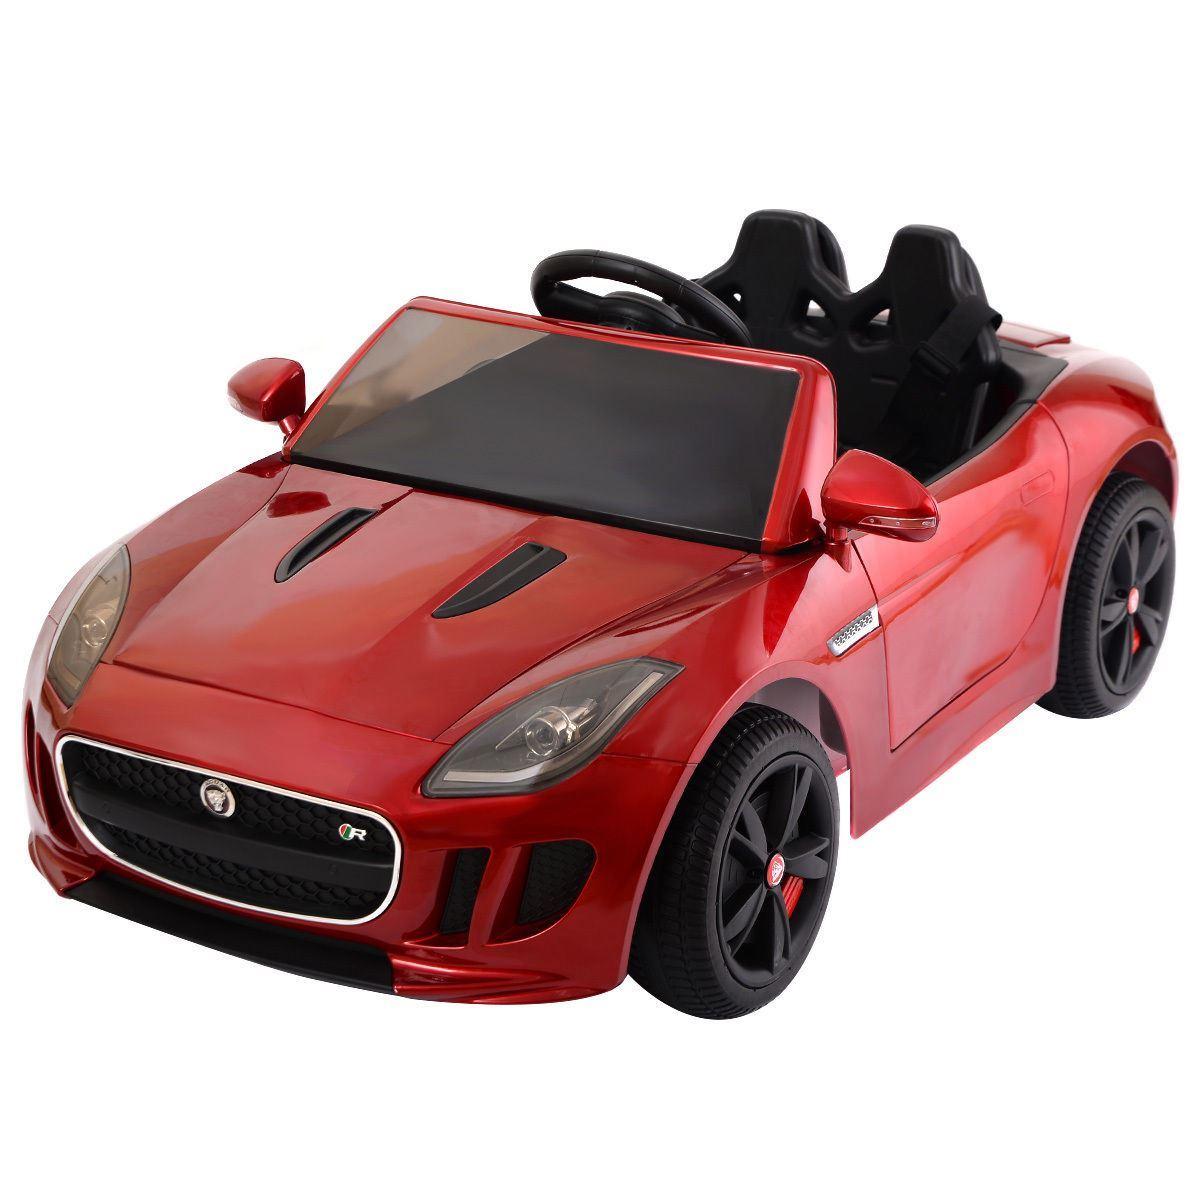 Picture of Online Gym Shop CB16979 Kids Baby Ride on Toy Car Jaguar F-TYPE 12V Battery Power Licensed MP3 with Remote Control